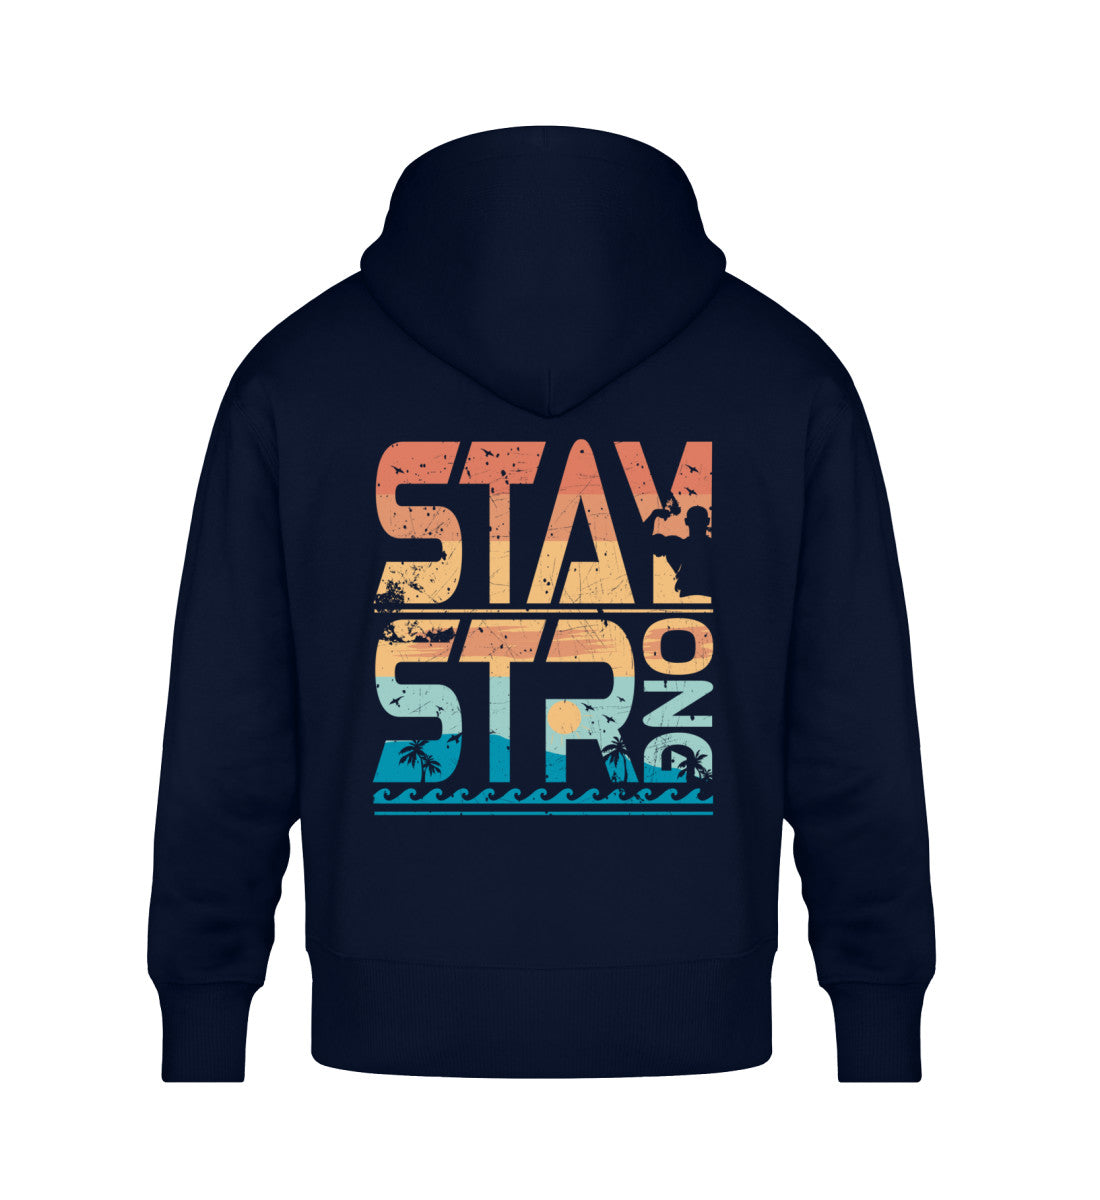 Organic Unisex Oversized Hoodie "STAY STRONG" French Navy